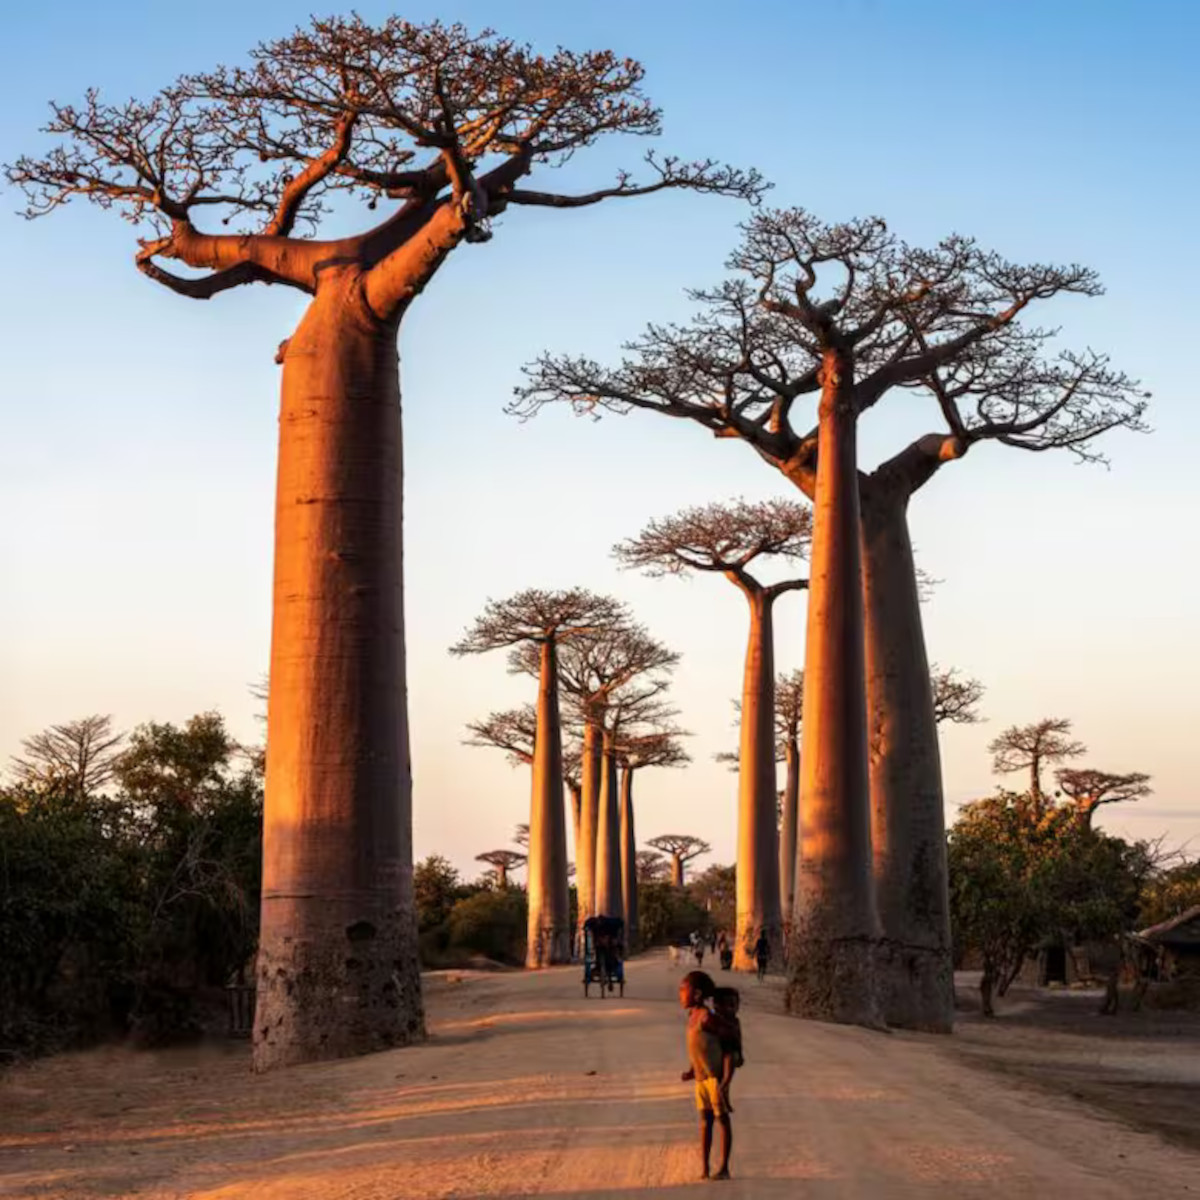 baobabs getty images3